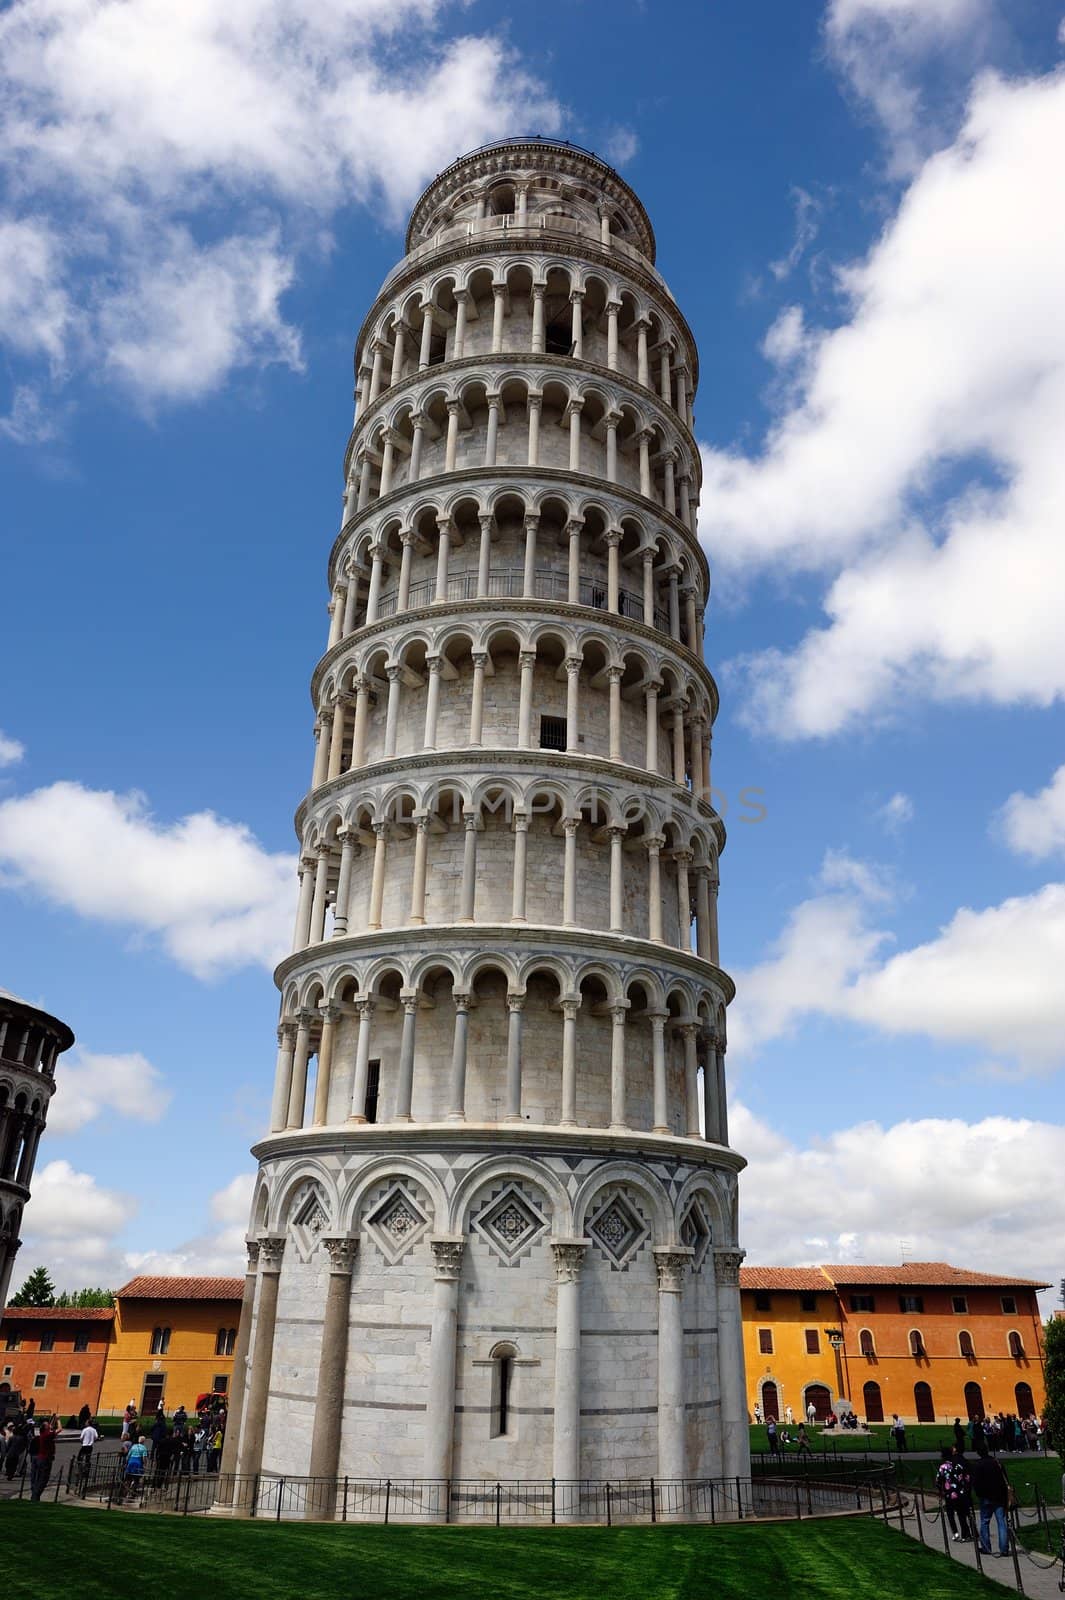 The famous leaning tower   in the ancient town of Pisa (Tuscany)